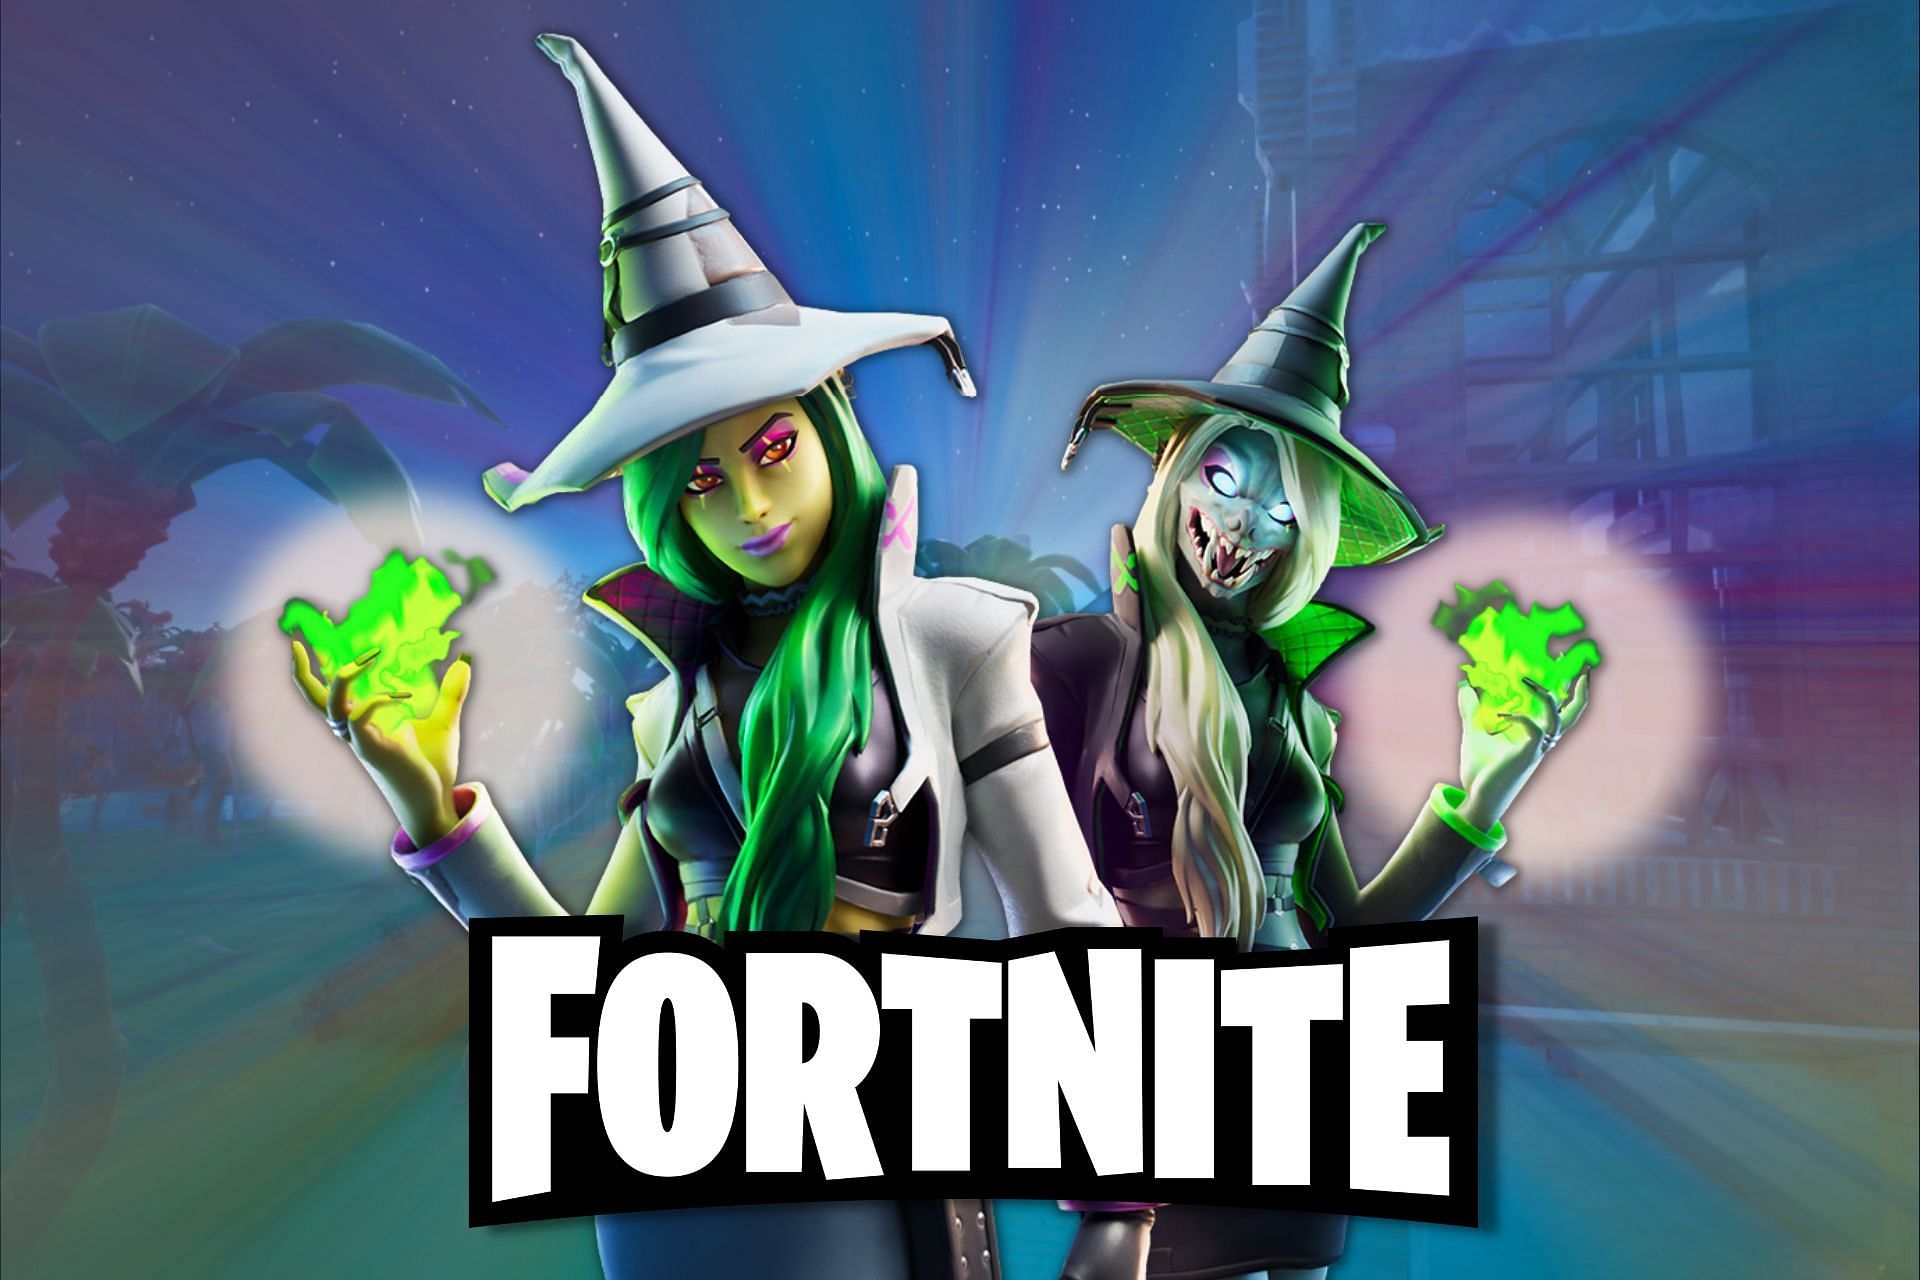 Fortnite players might encounter sorcerers and magic spells in the upcoming Season 9, an anonymous leak source has suggested (Image via Sportskeeda)